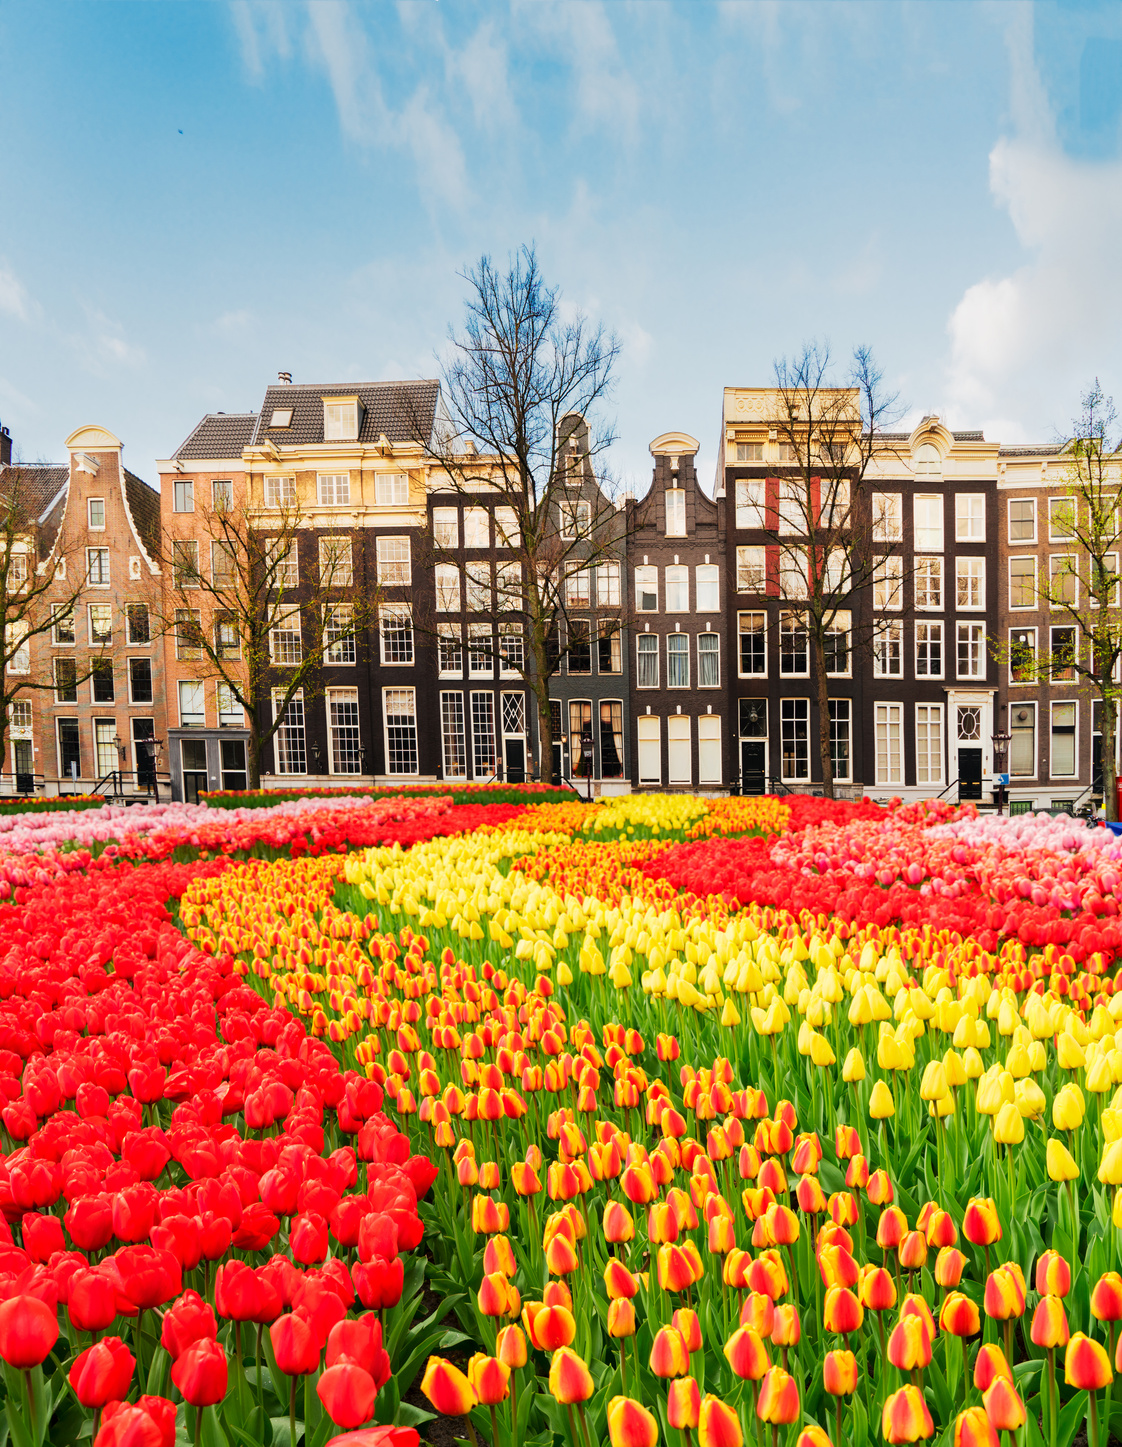 Houses of Amsterdam